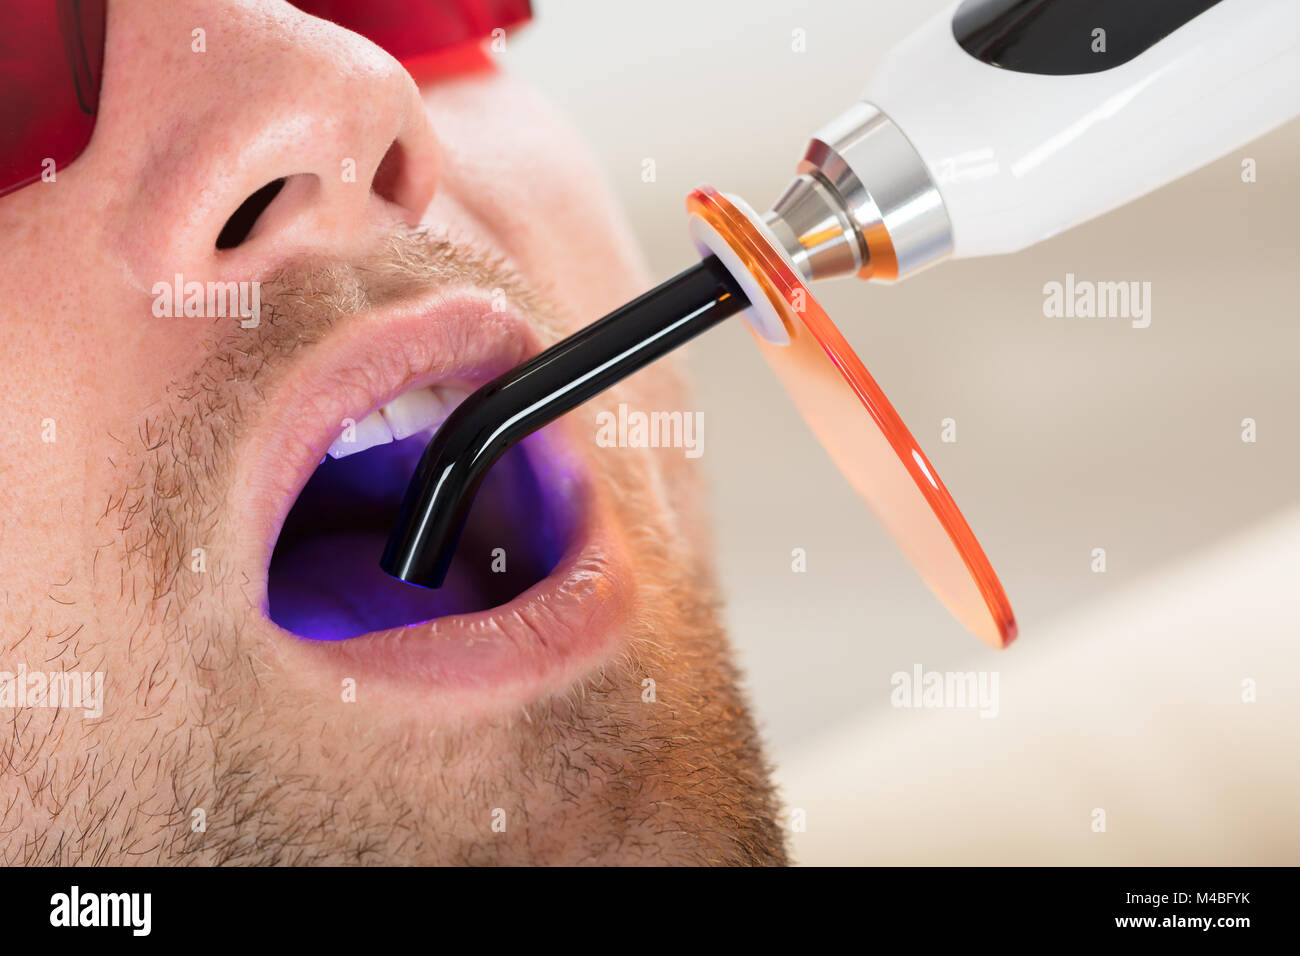 Man's Teeth Are Treated With Dental UV Curing Light Lamp Stock Photo